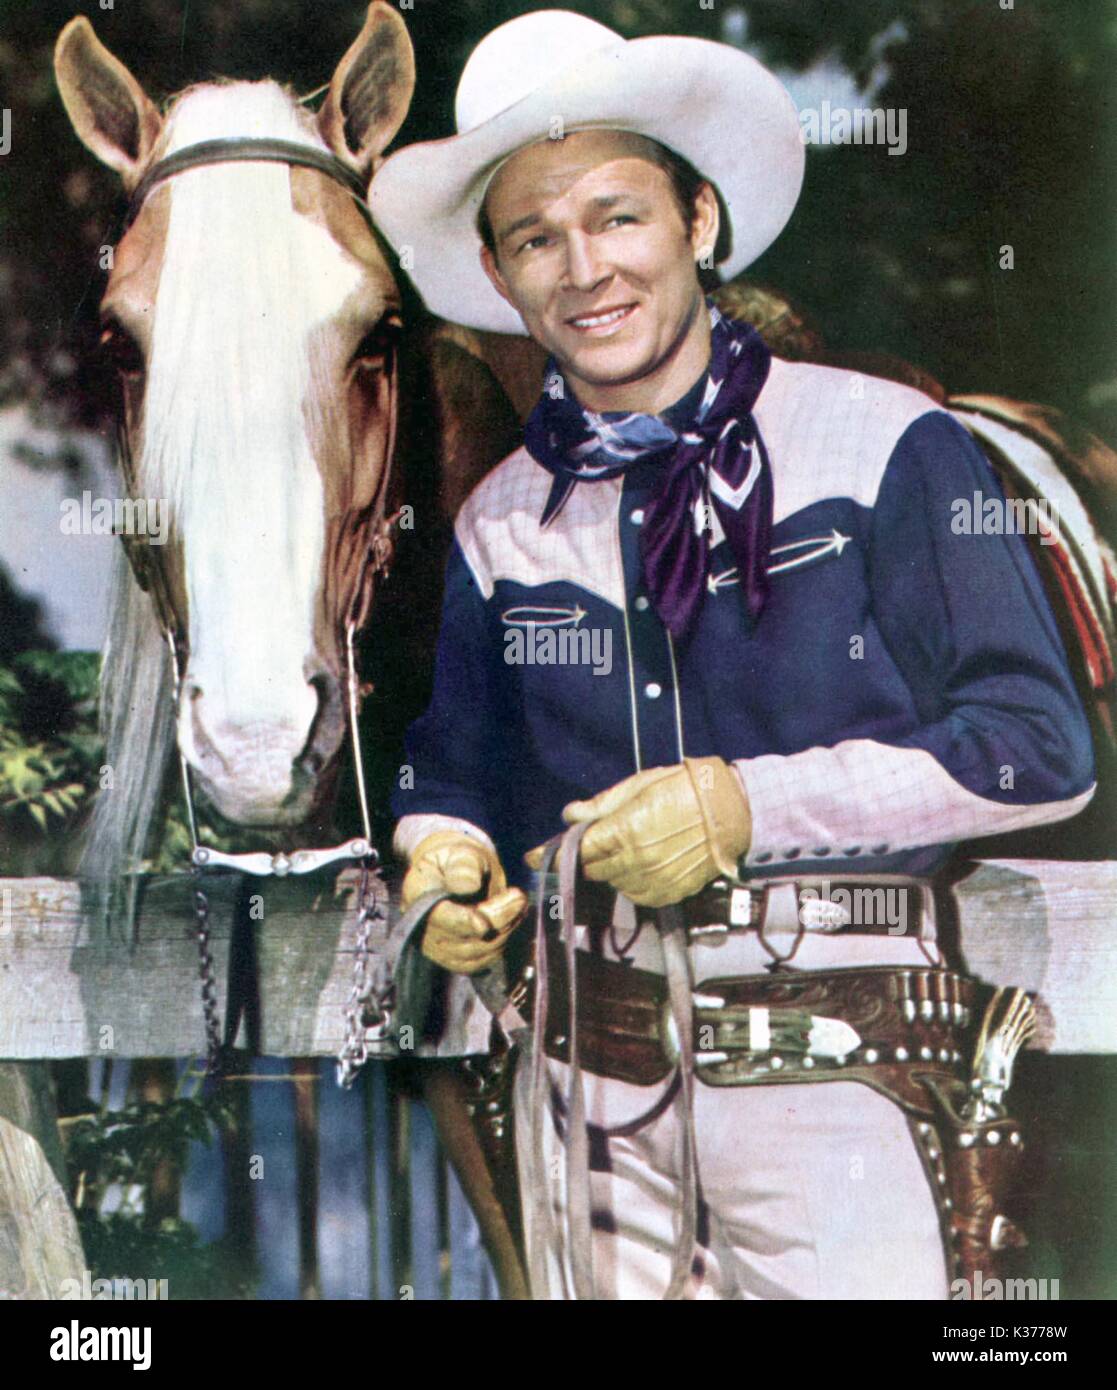 List 105+ Pictures Pictures Of Roy Rogers And Clint Black Full HD, 2k, 4k